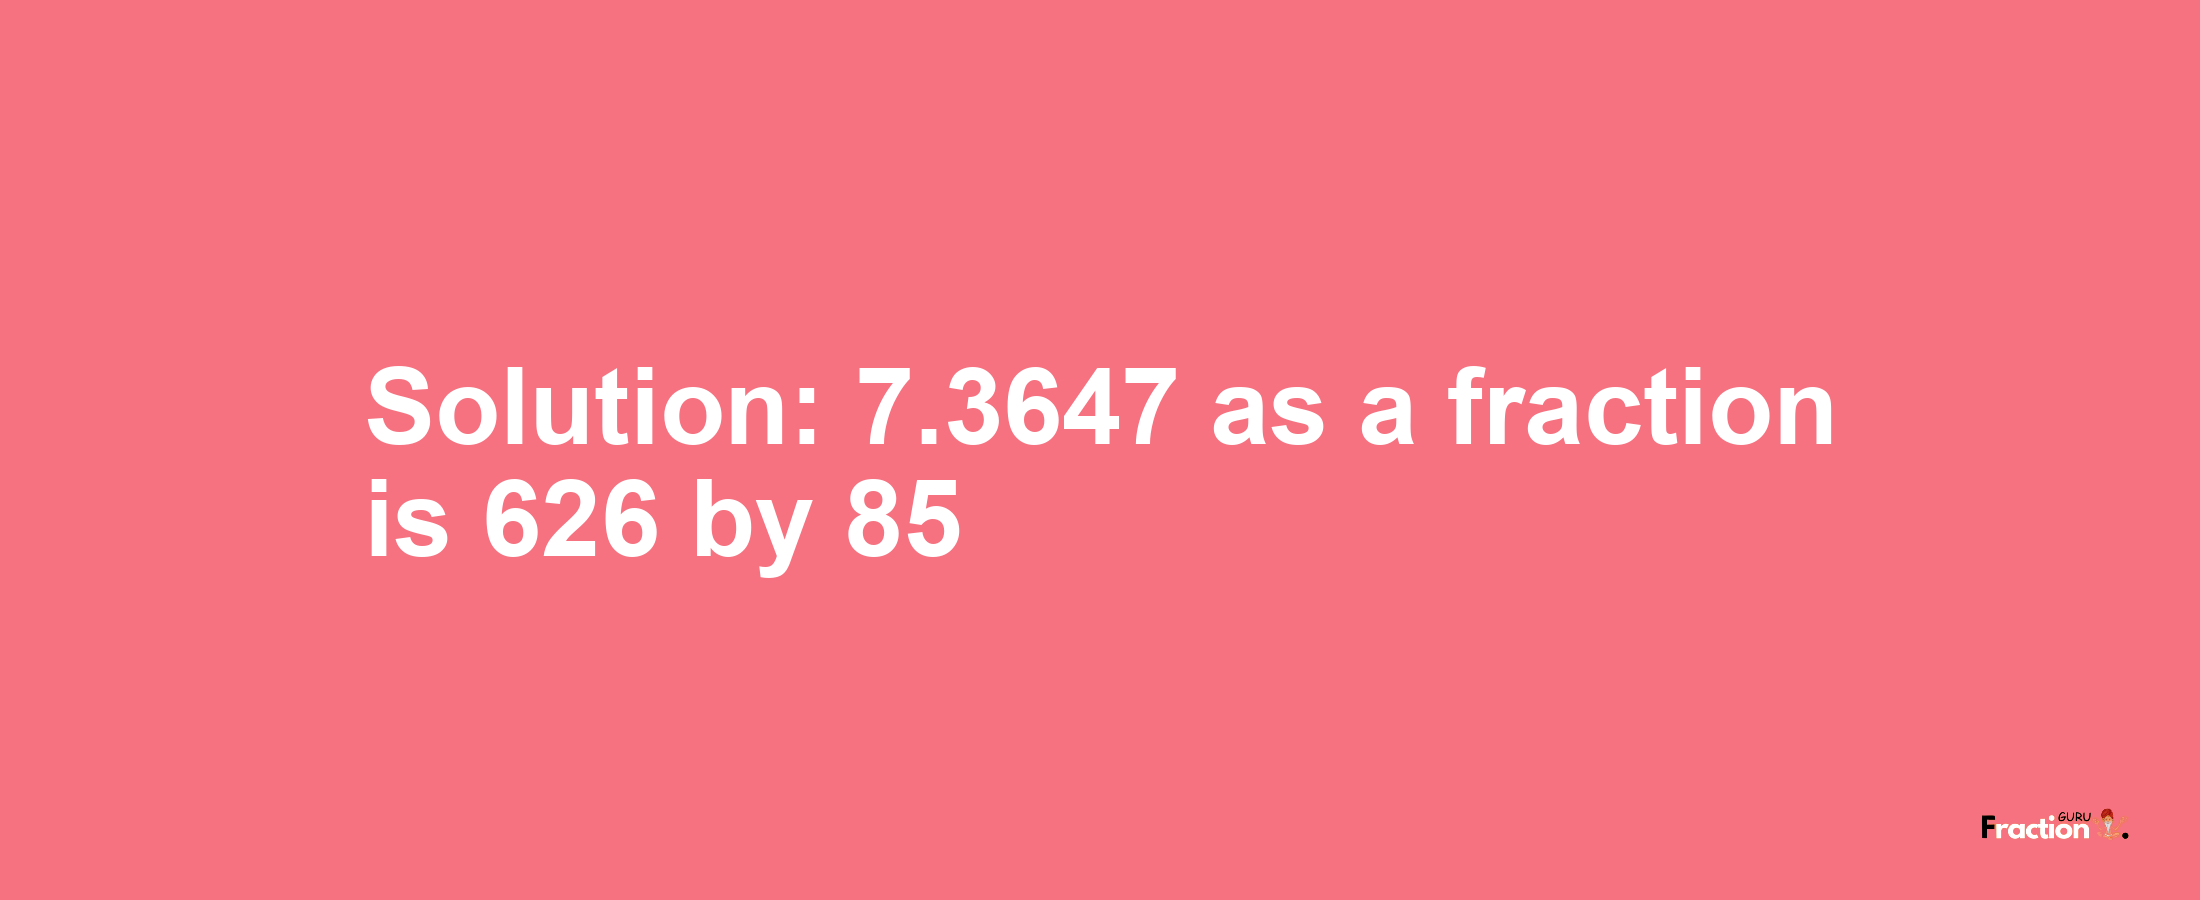 Solution:7.3647 as a fraction is 626/85